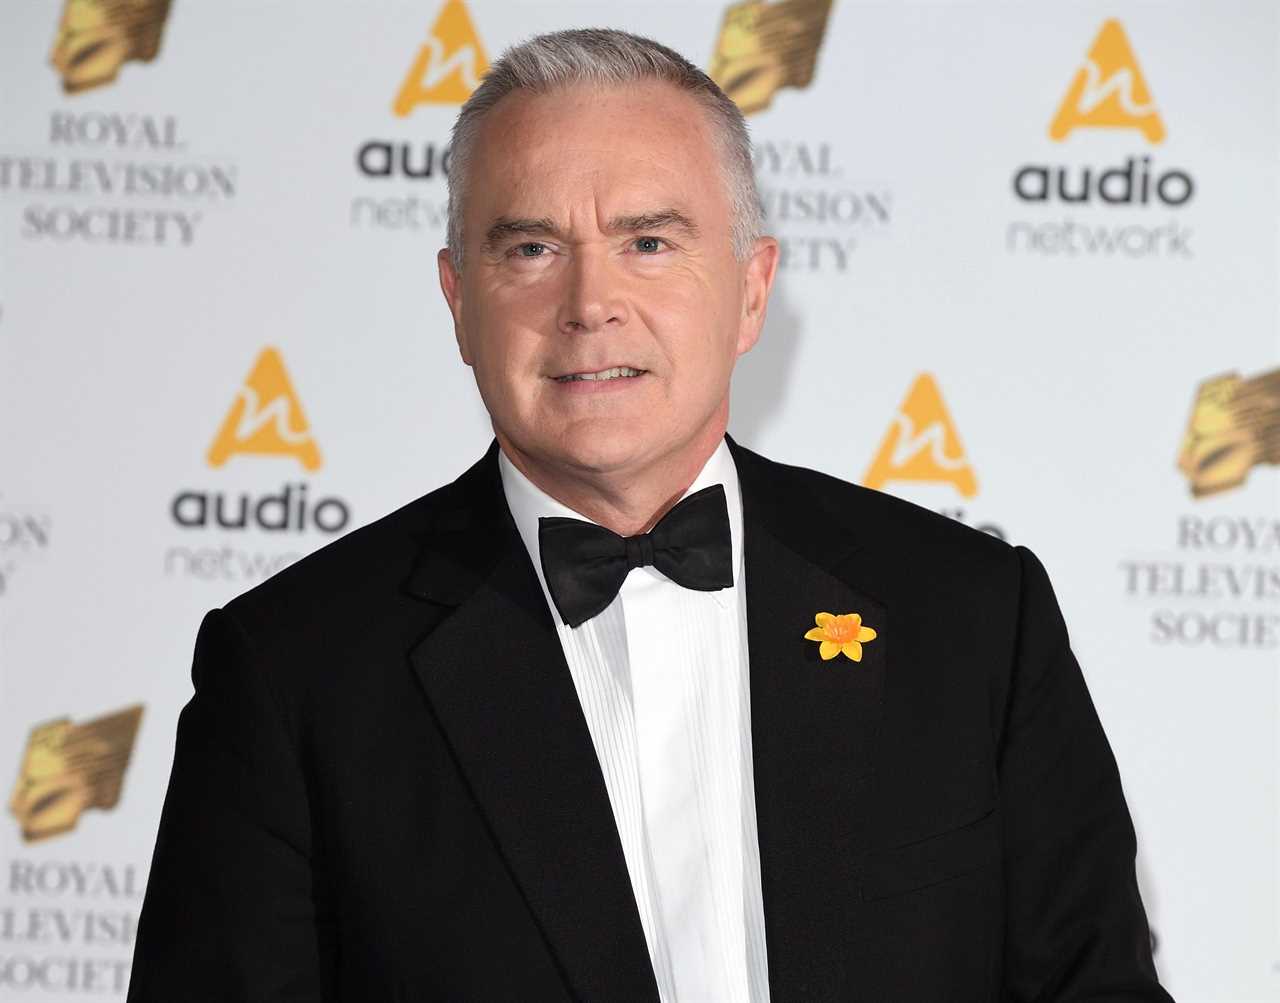 Huw Edwards has been presenting news programmes since 1999 with the BBC